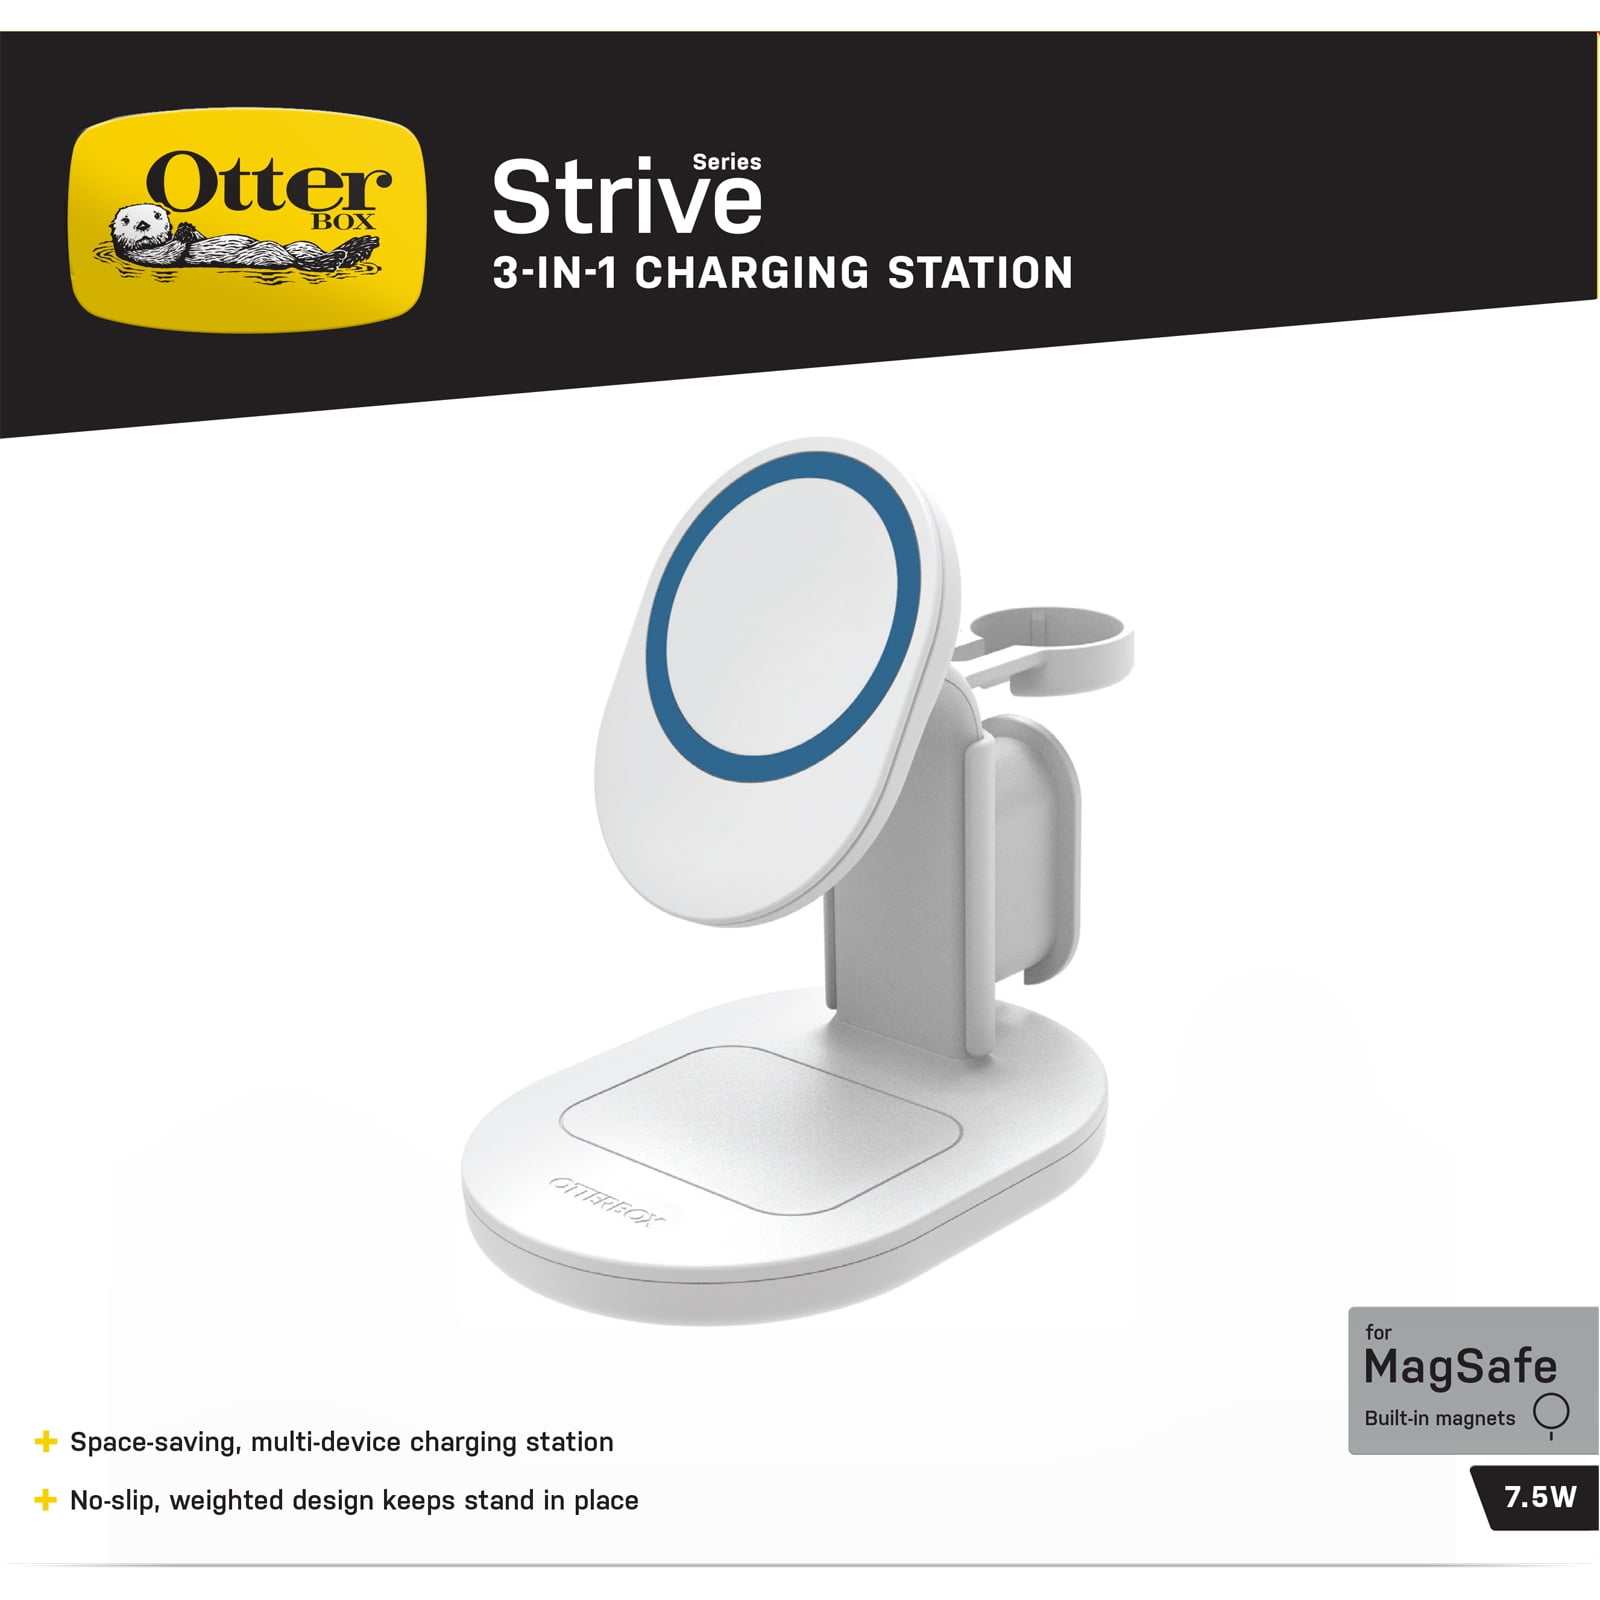 OtterBox Strive Series 3-in-1 Charging Station for MagSafe - Electron 